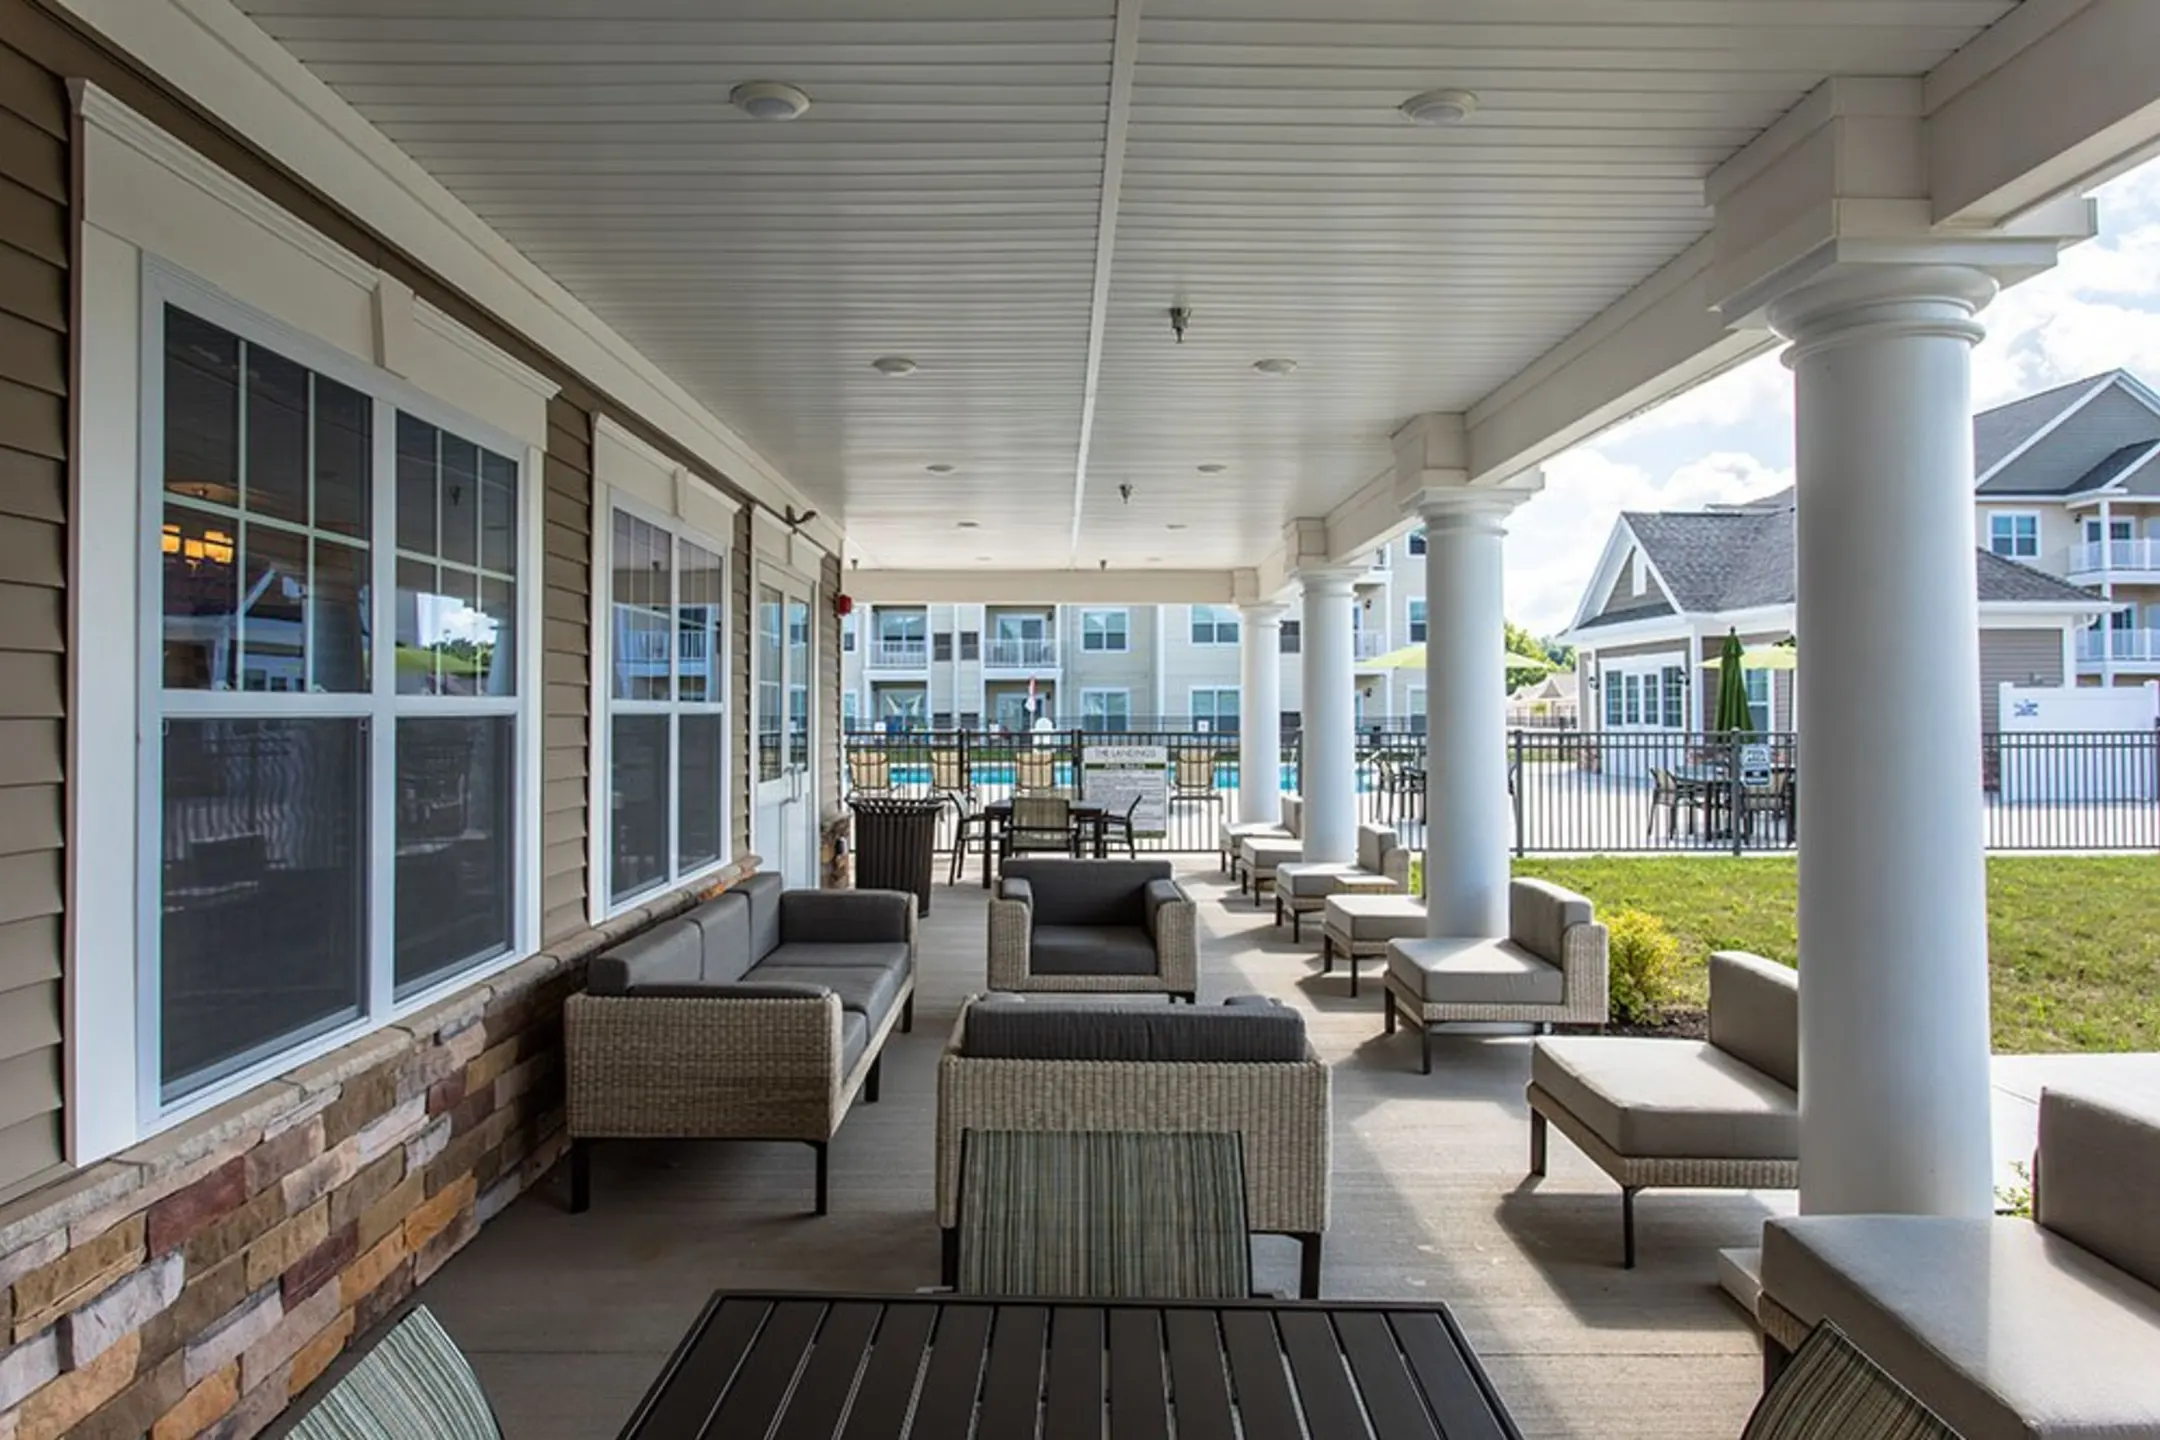 Patio / Deck - The Landings at Meadowood - Baldwinsville, NY